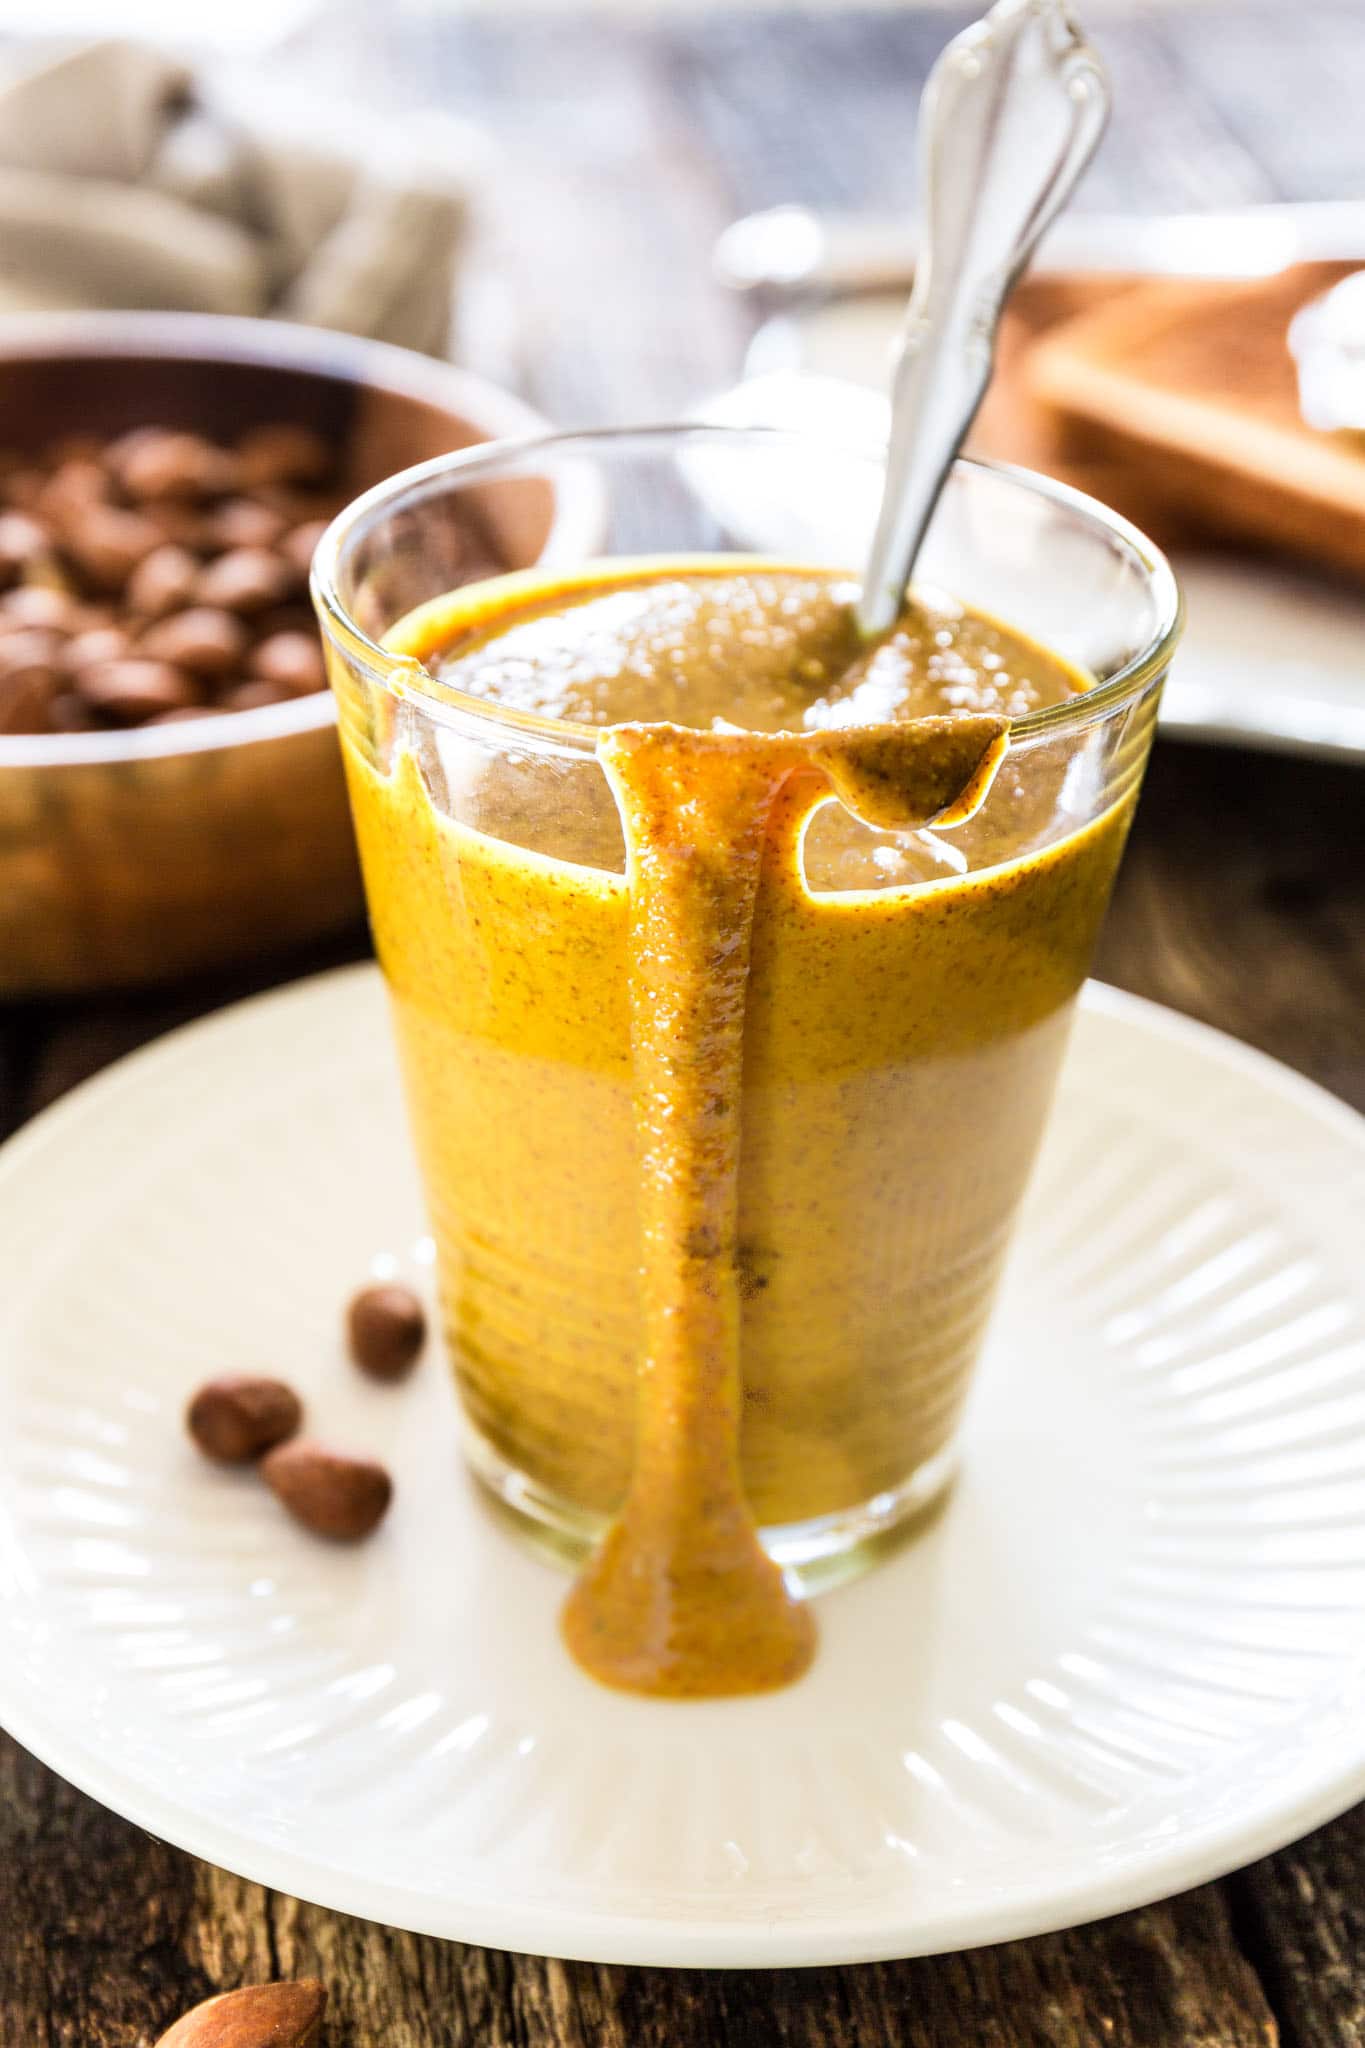 Turmeric Almond Butter | www.oliviascuisine.com | Nut butter lovers, rejoice! This almond butter mixed with turmeric is everything you’re looking for: creamy, salty and good for you, loaded with health benefits from both the almonds and the turmeric.